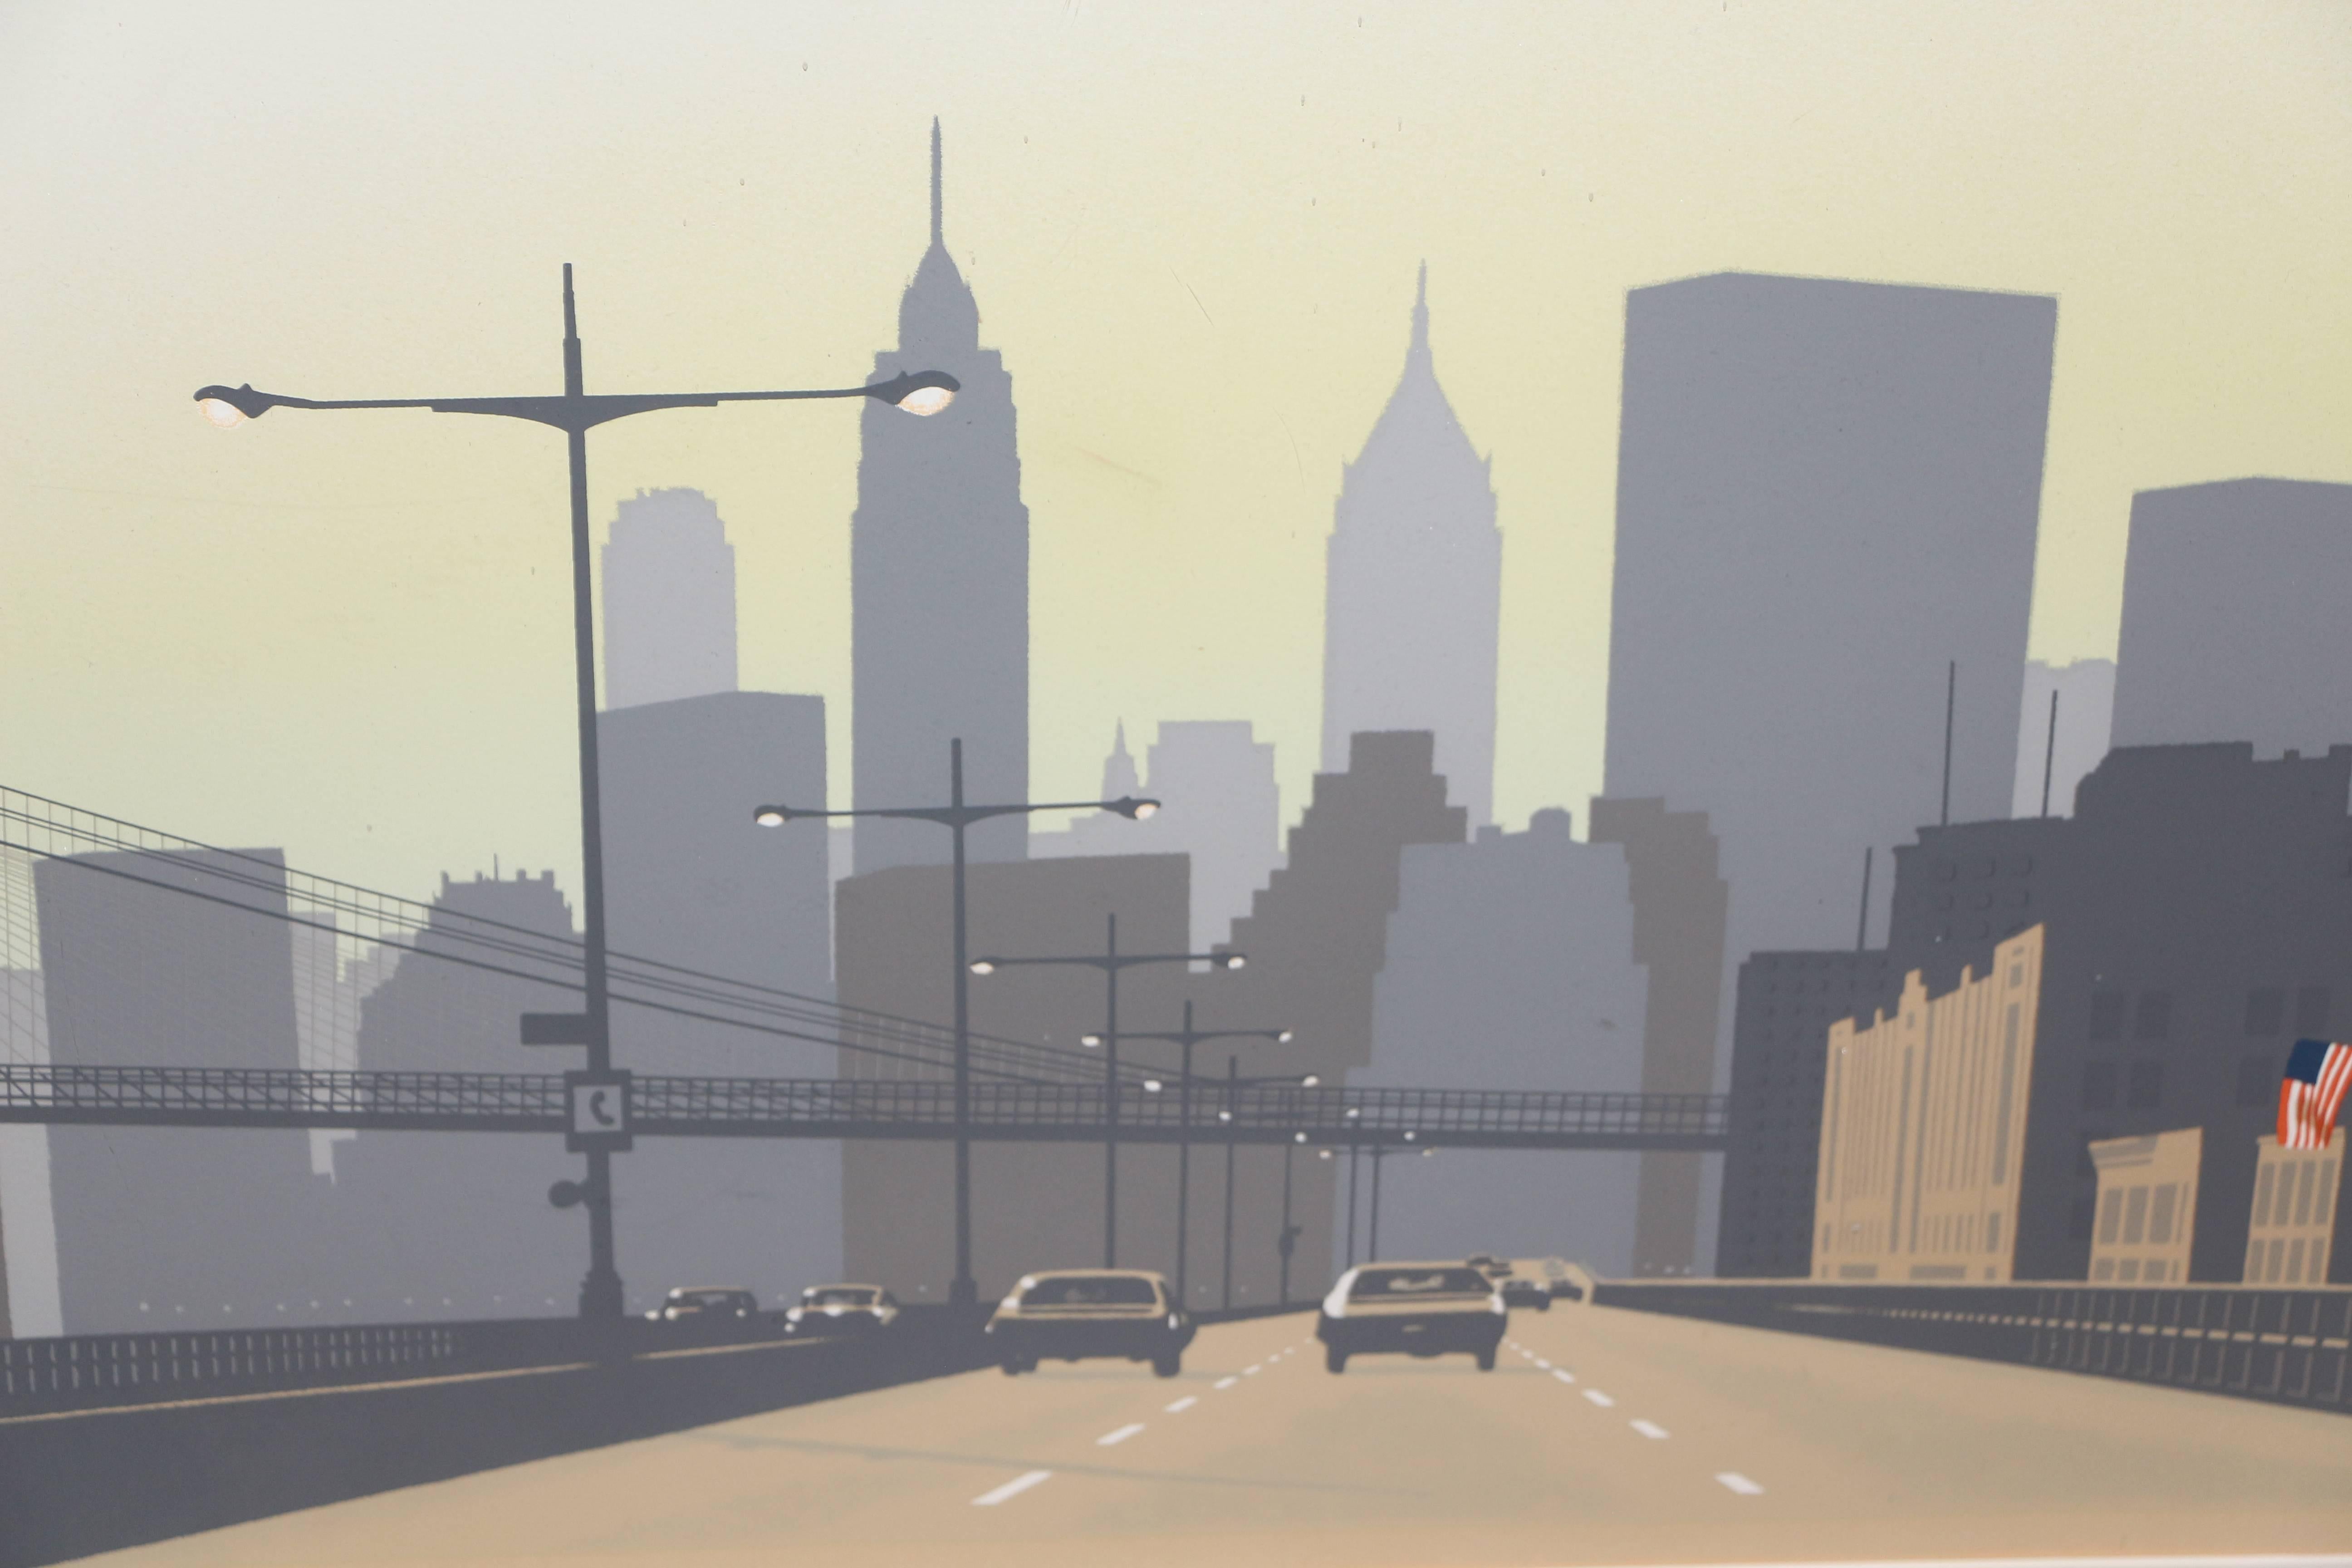 A nice serigraph by the noted New York artist Howard Kanovitz (1929-2009). it is from the early 1970s and features the skyline of New York City and is probably the East Side Drive. It is framed in the original frame and under acrylic. The matte